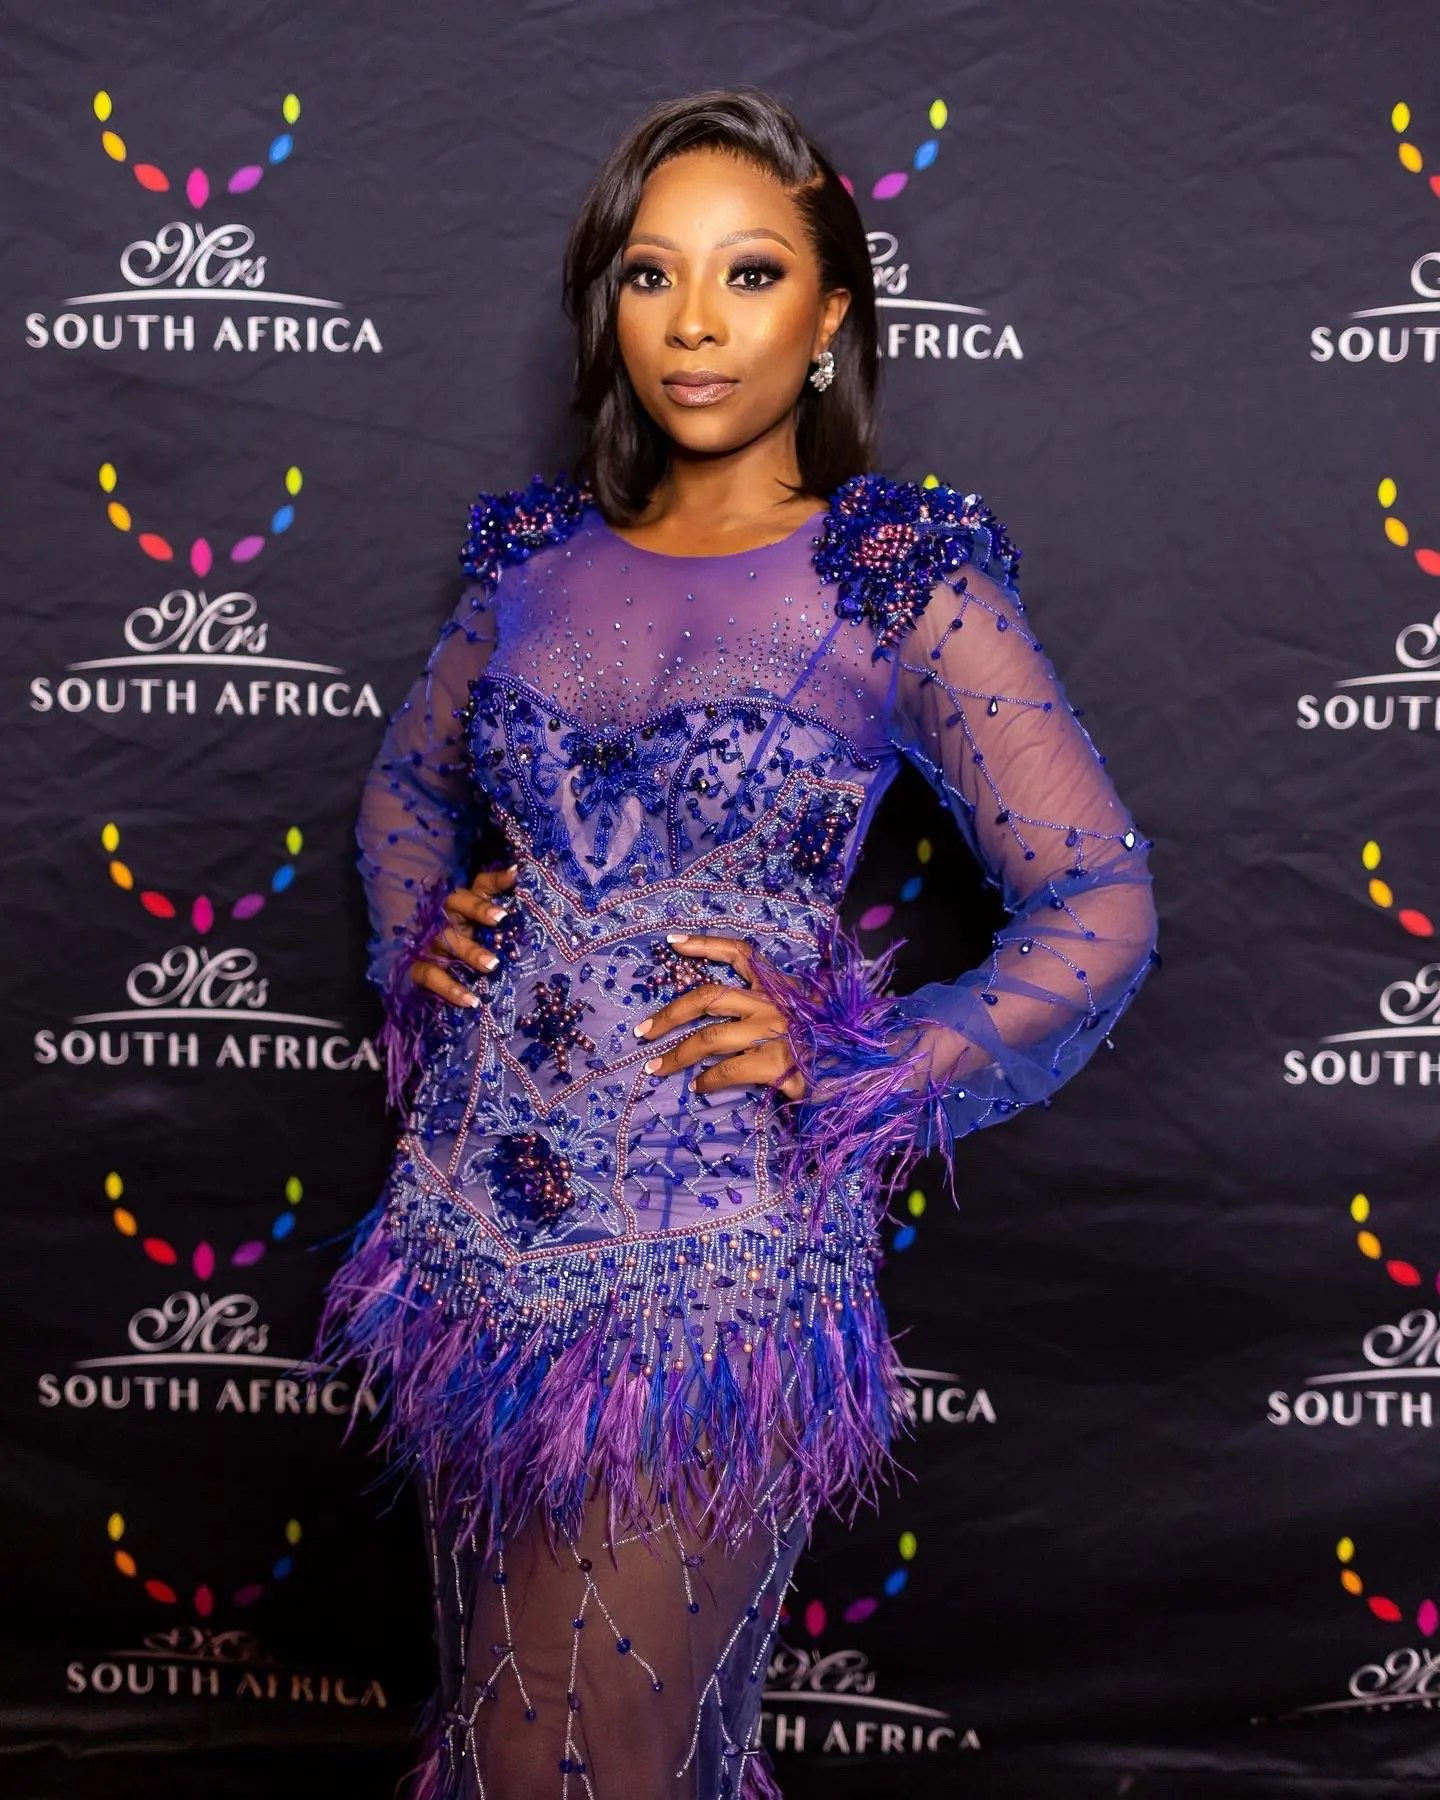 Media personality Pearl Modiadie bags major acting role